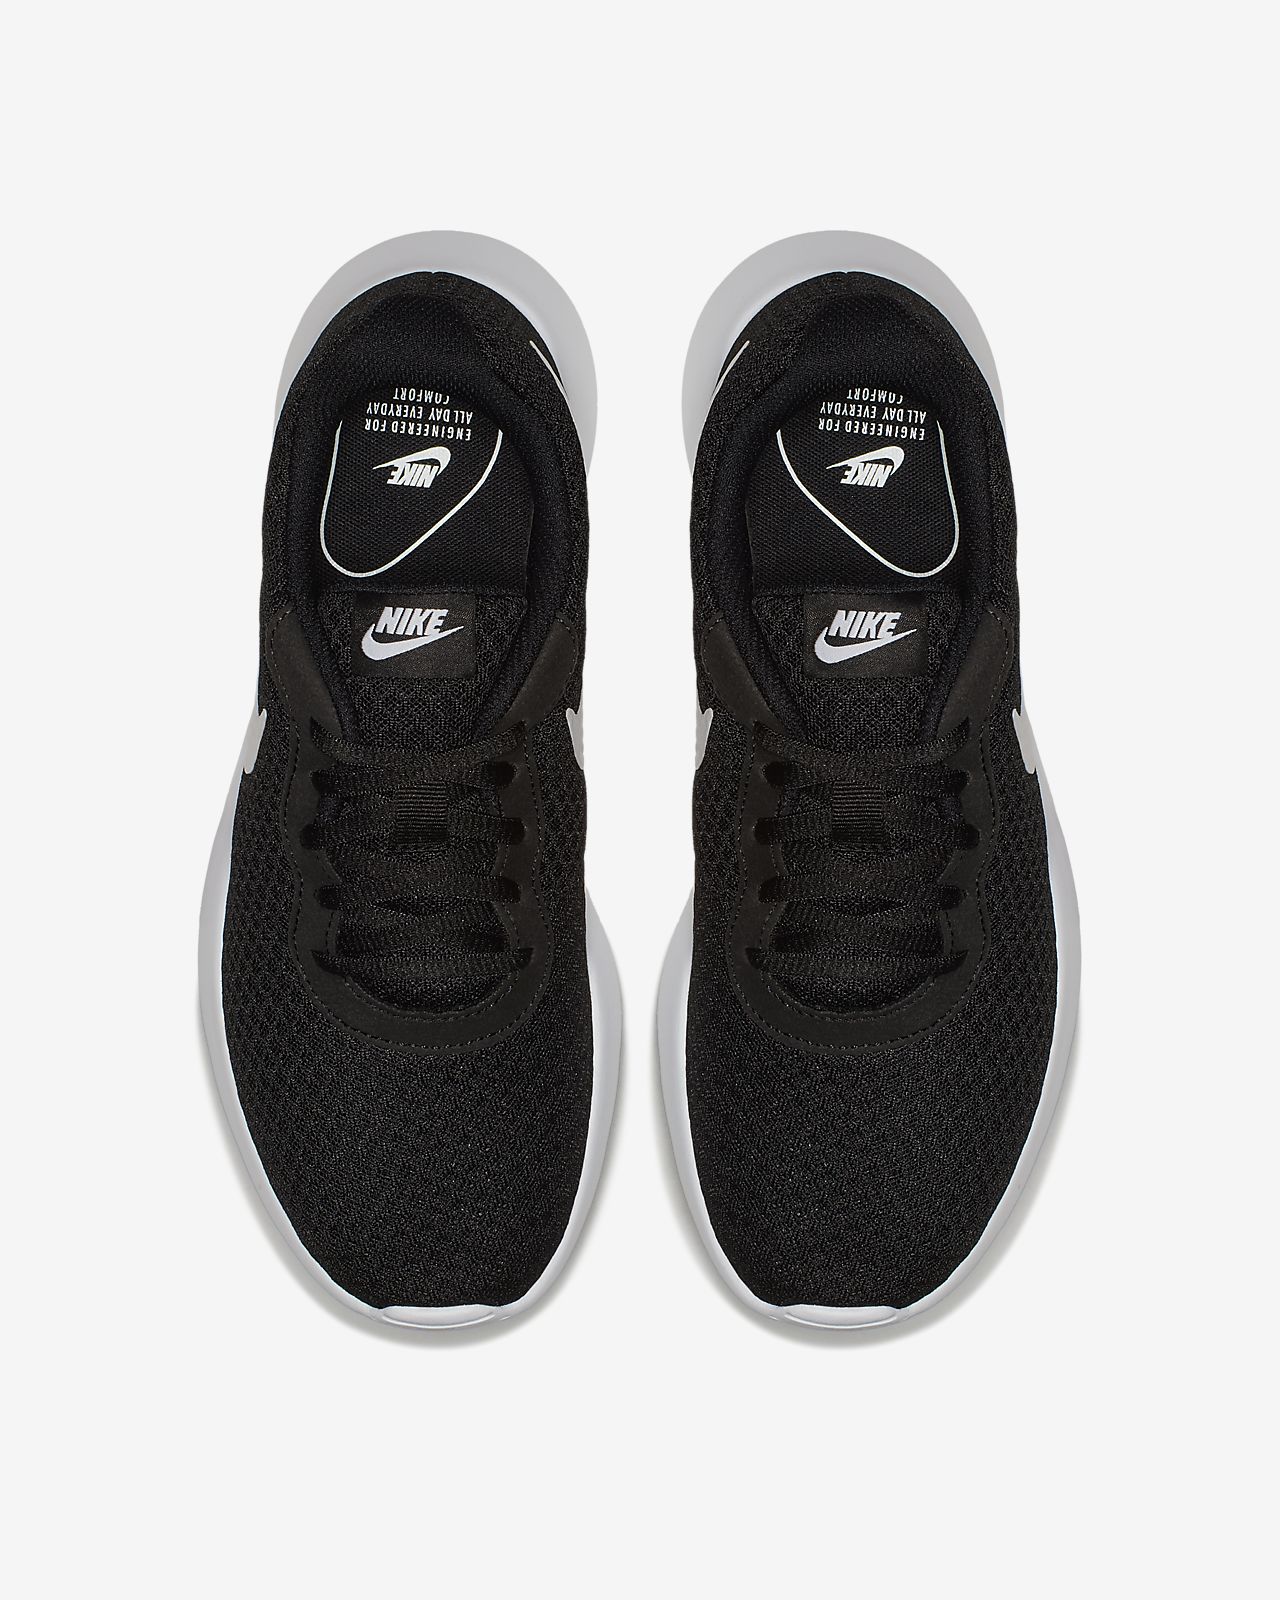 nike everyday comfort shoes